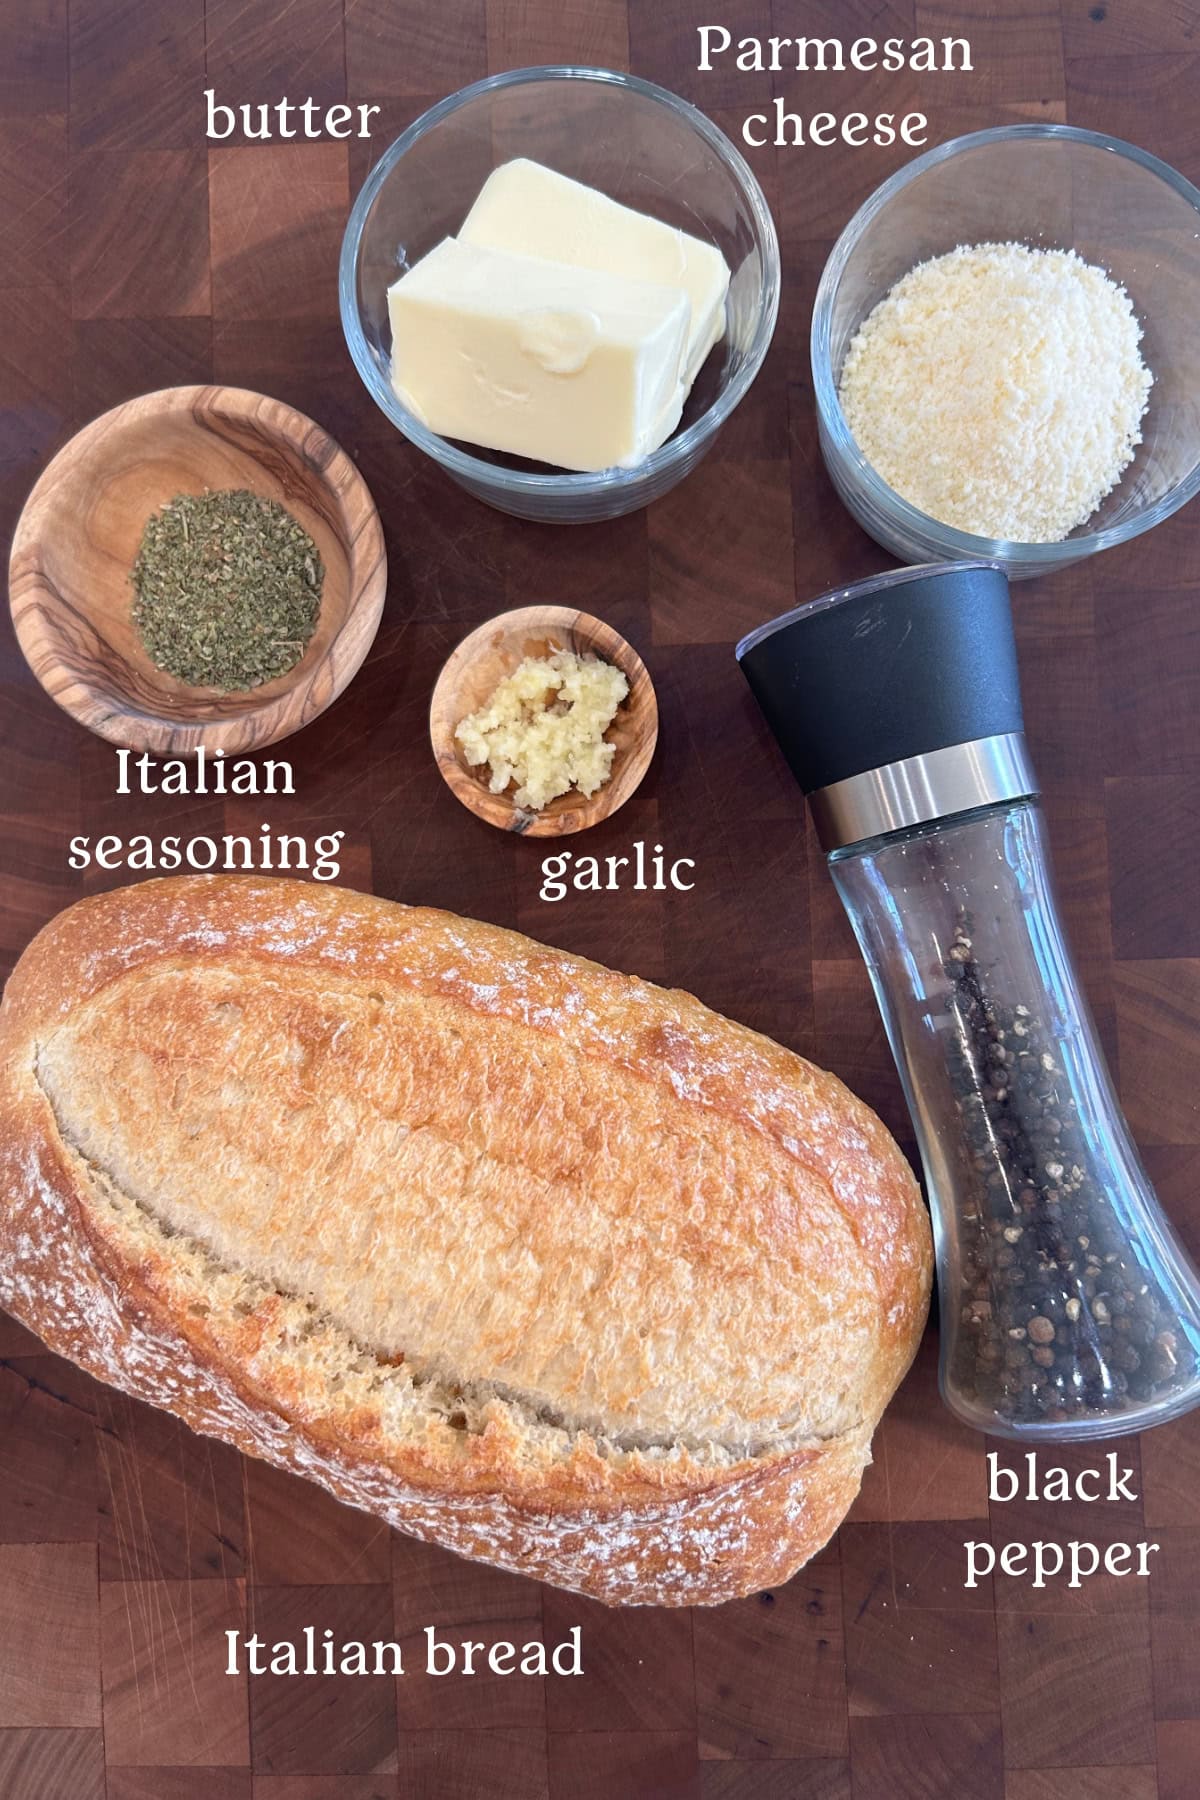 ingredients displayed for making garlic bread spread